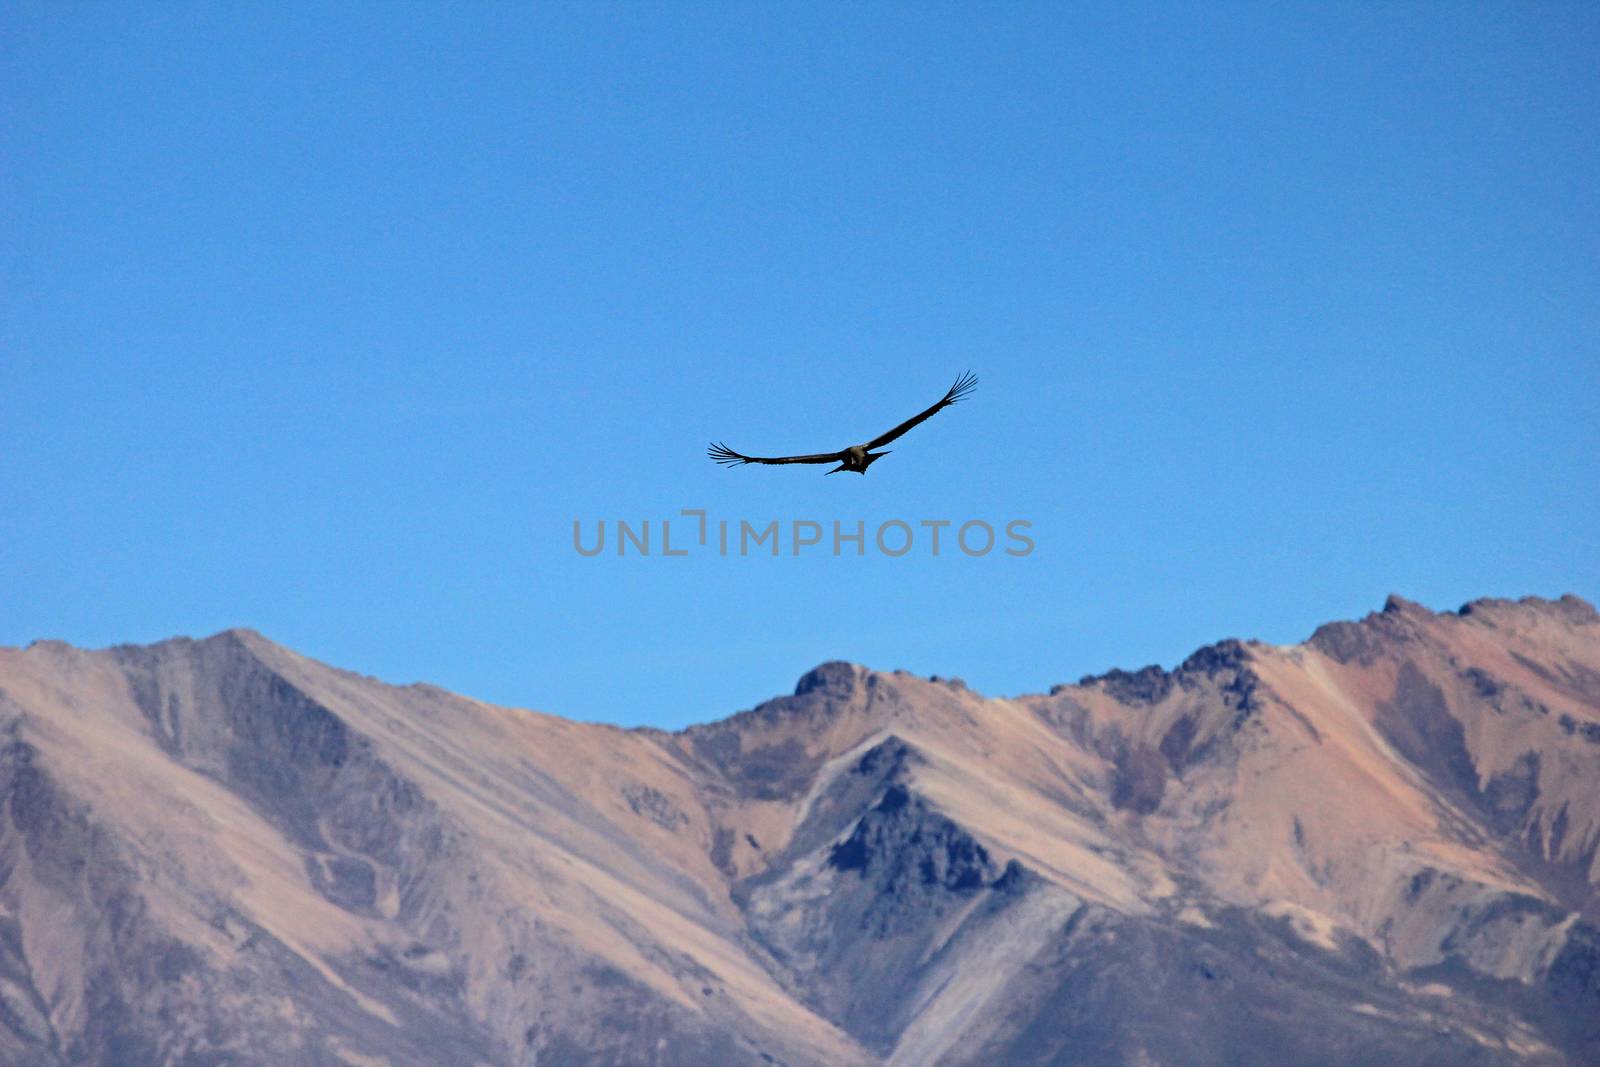 A male young andean condor flying over the mountains of Colca canyon - one of the deepest canyons in the world, near the city of Arequipa in Peru.